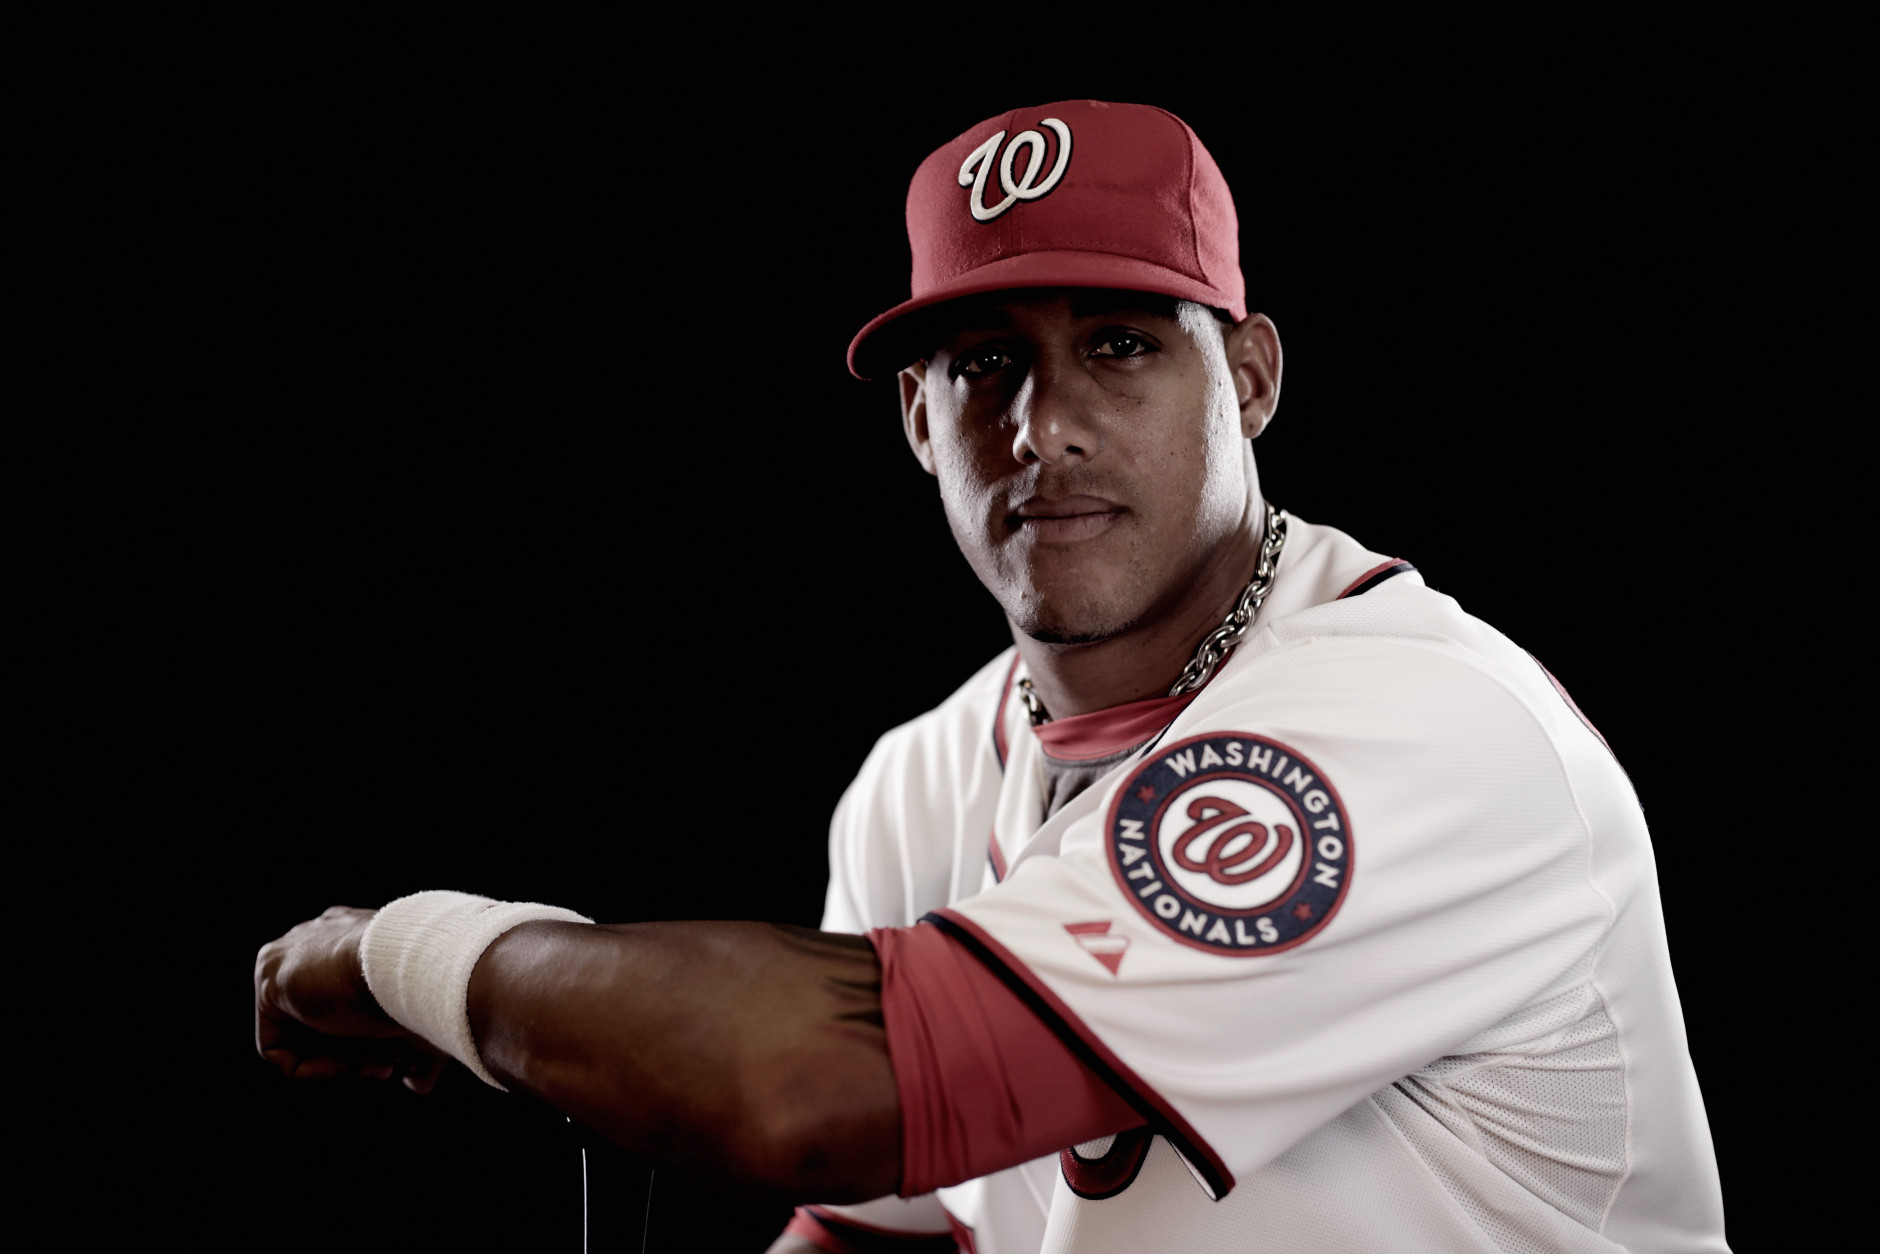 VIERA, FL - MARCH 01:  Yunel Escobar #5 of the Washington Nationals poses for a portrait during photo day at Space Coast Stadium on March 1, 2015 in Viera, Florida.  (Photo by Chris Trotman/Getty Images)